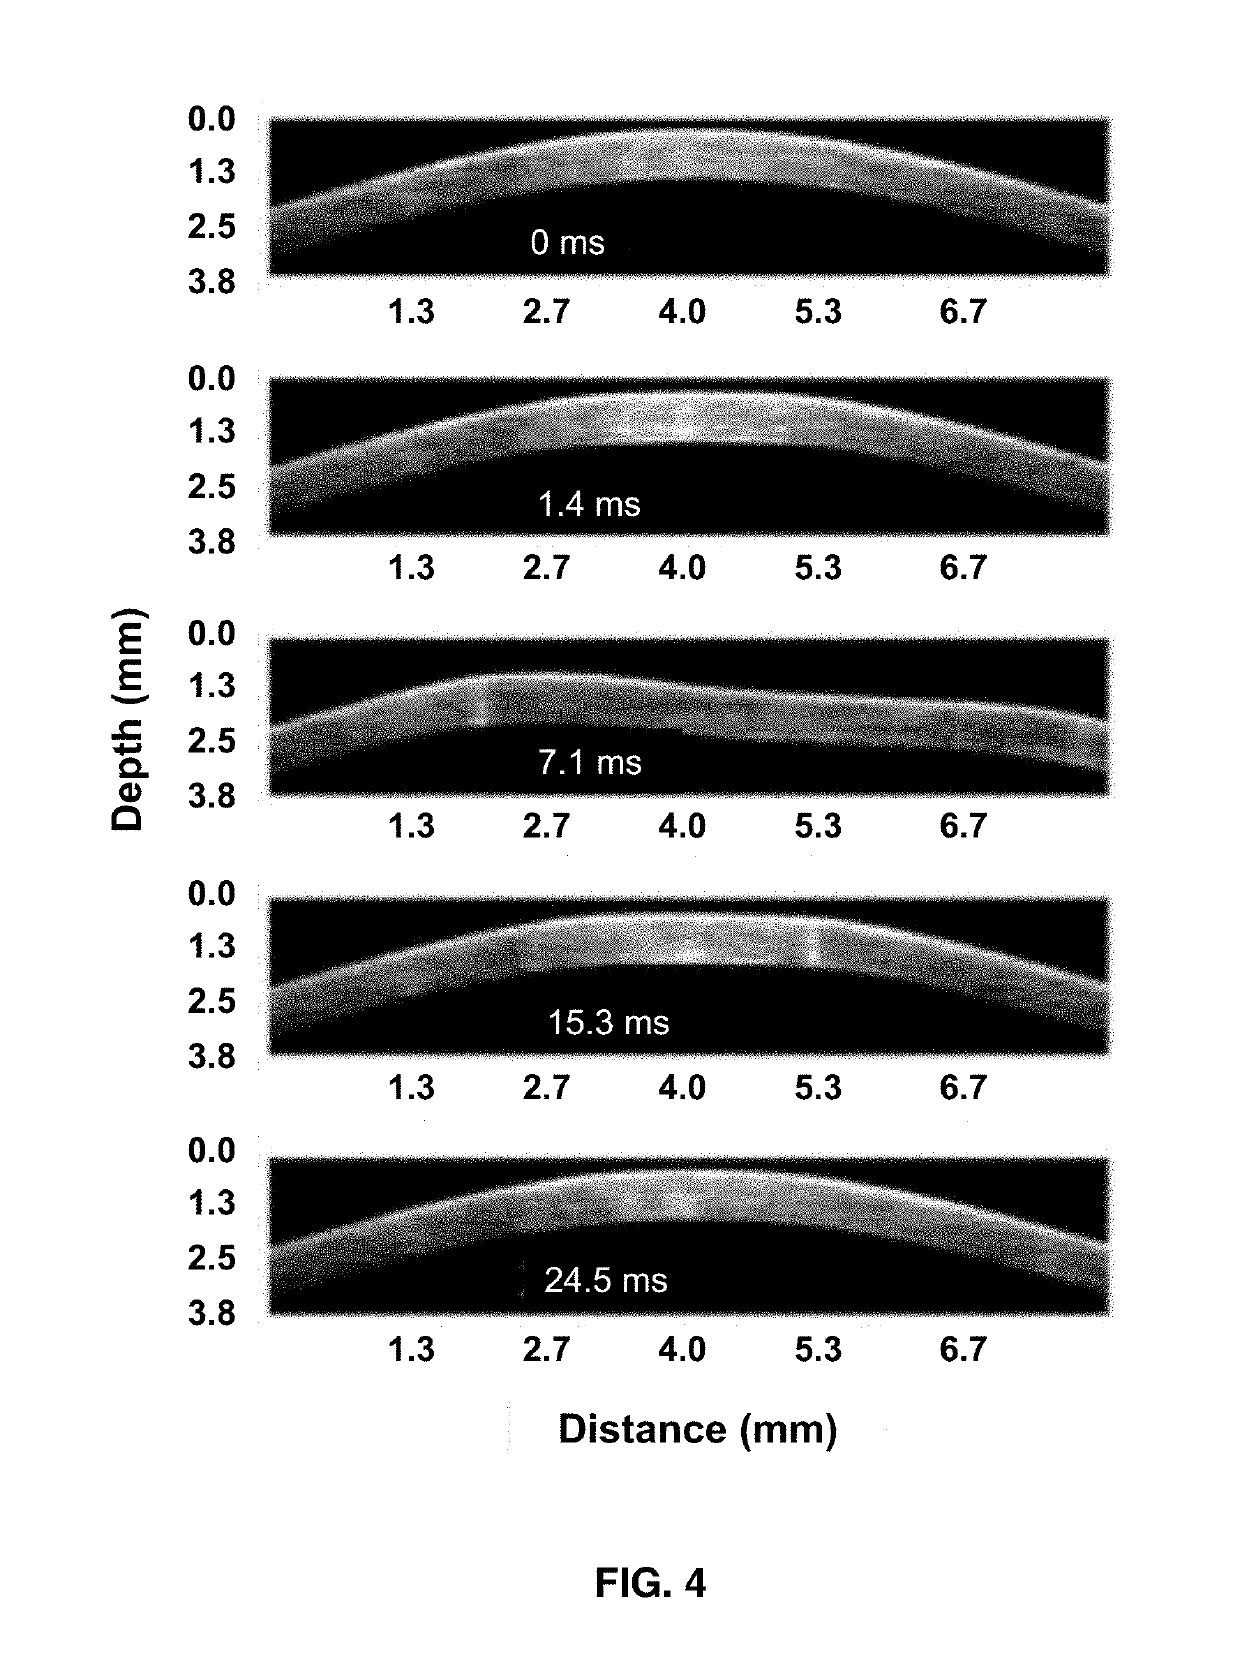 System and Method for Measuring Intraocular Pressure and Ocular Tissue Biomechanical Properties